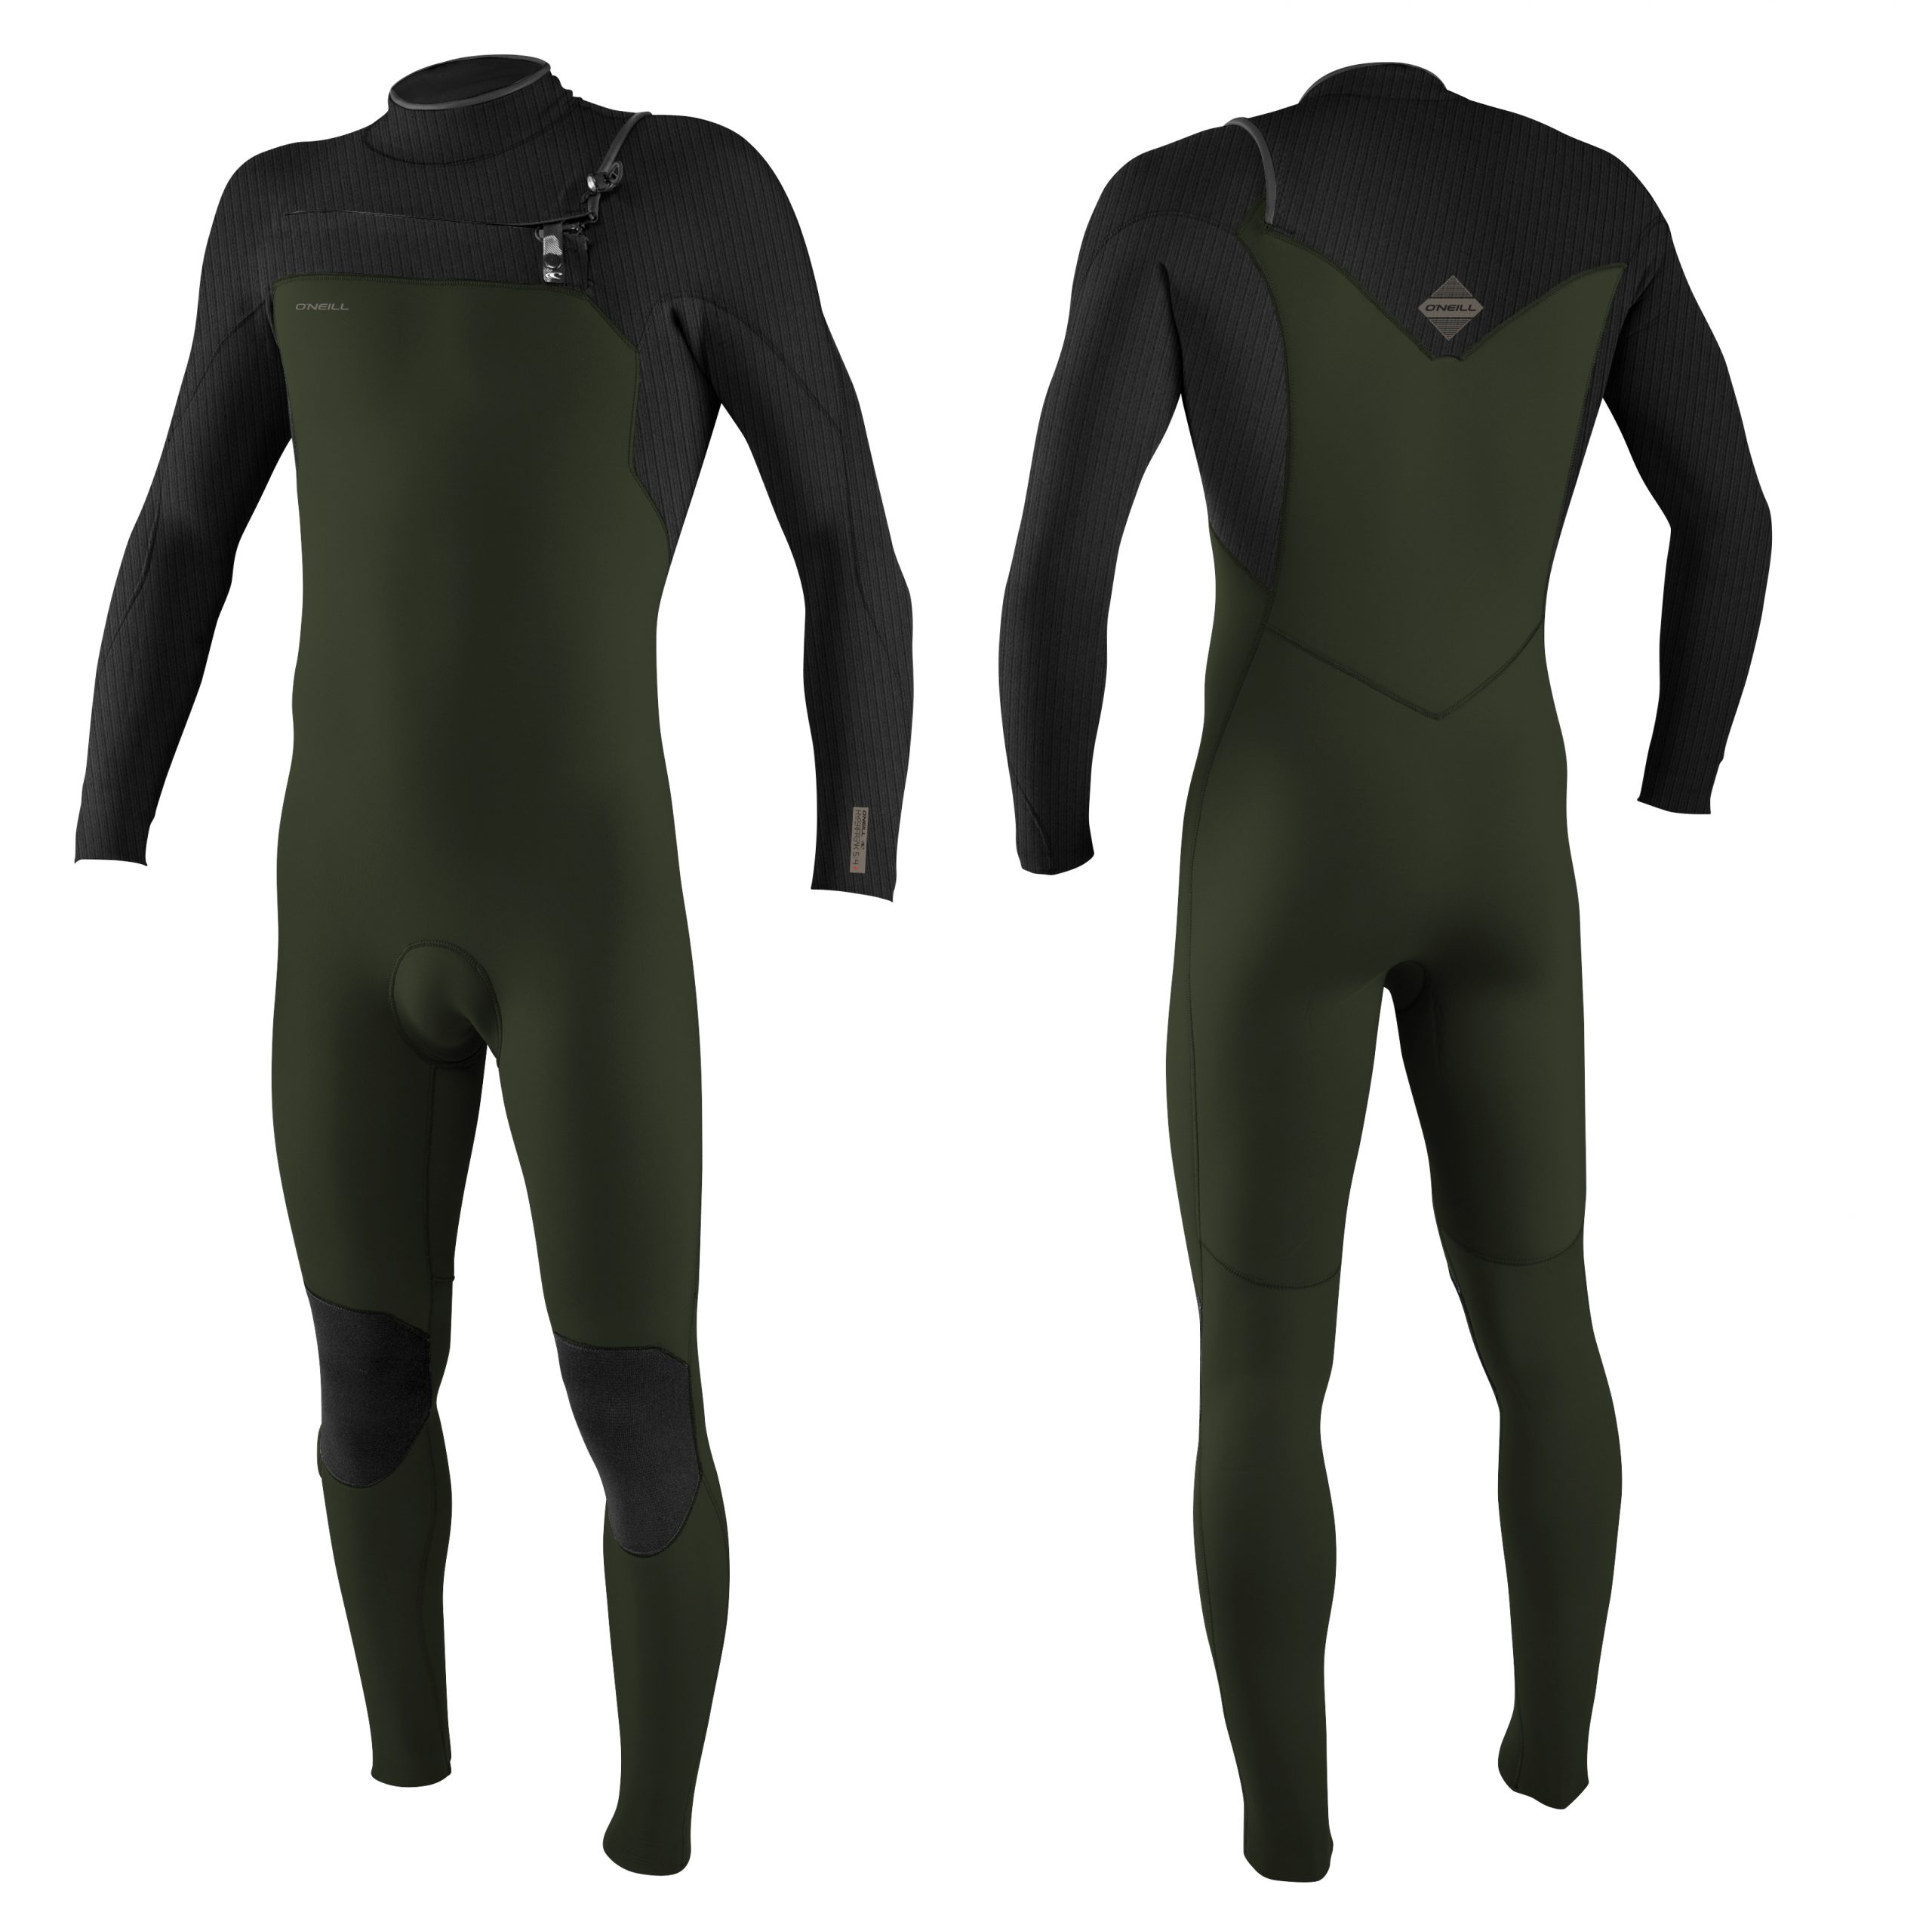 O'Neill SS21 Wetsuits